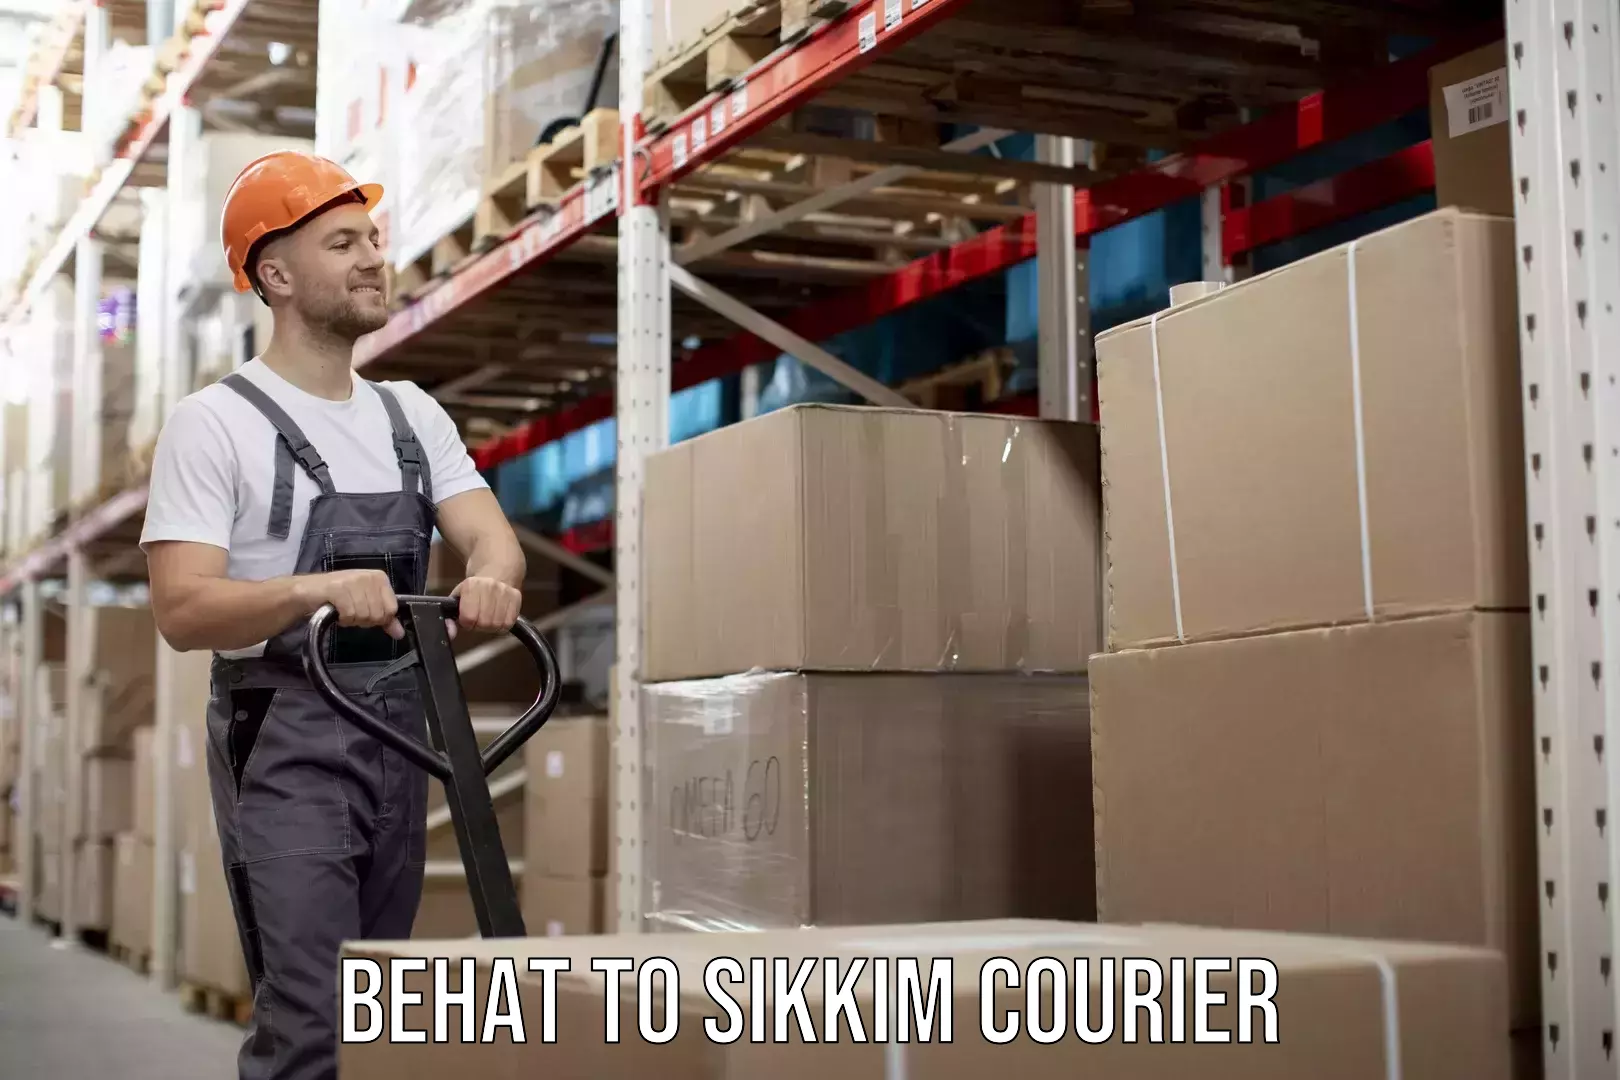 Customer-centric shipping in Behat to Sikkim